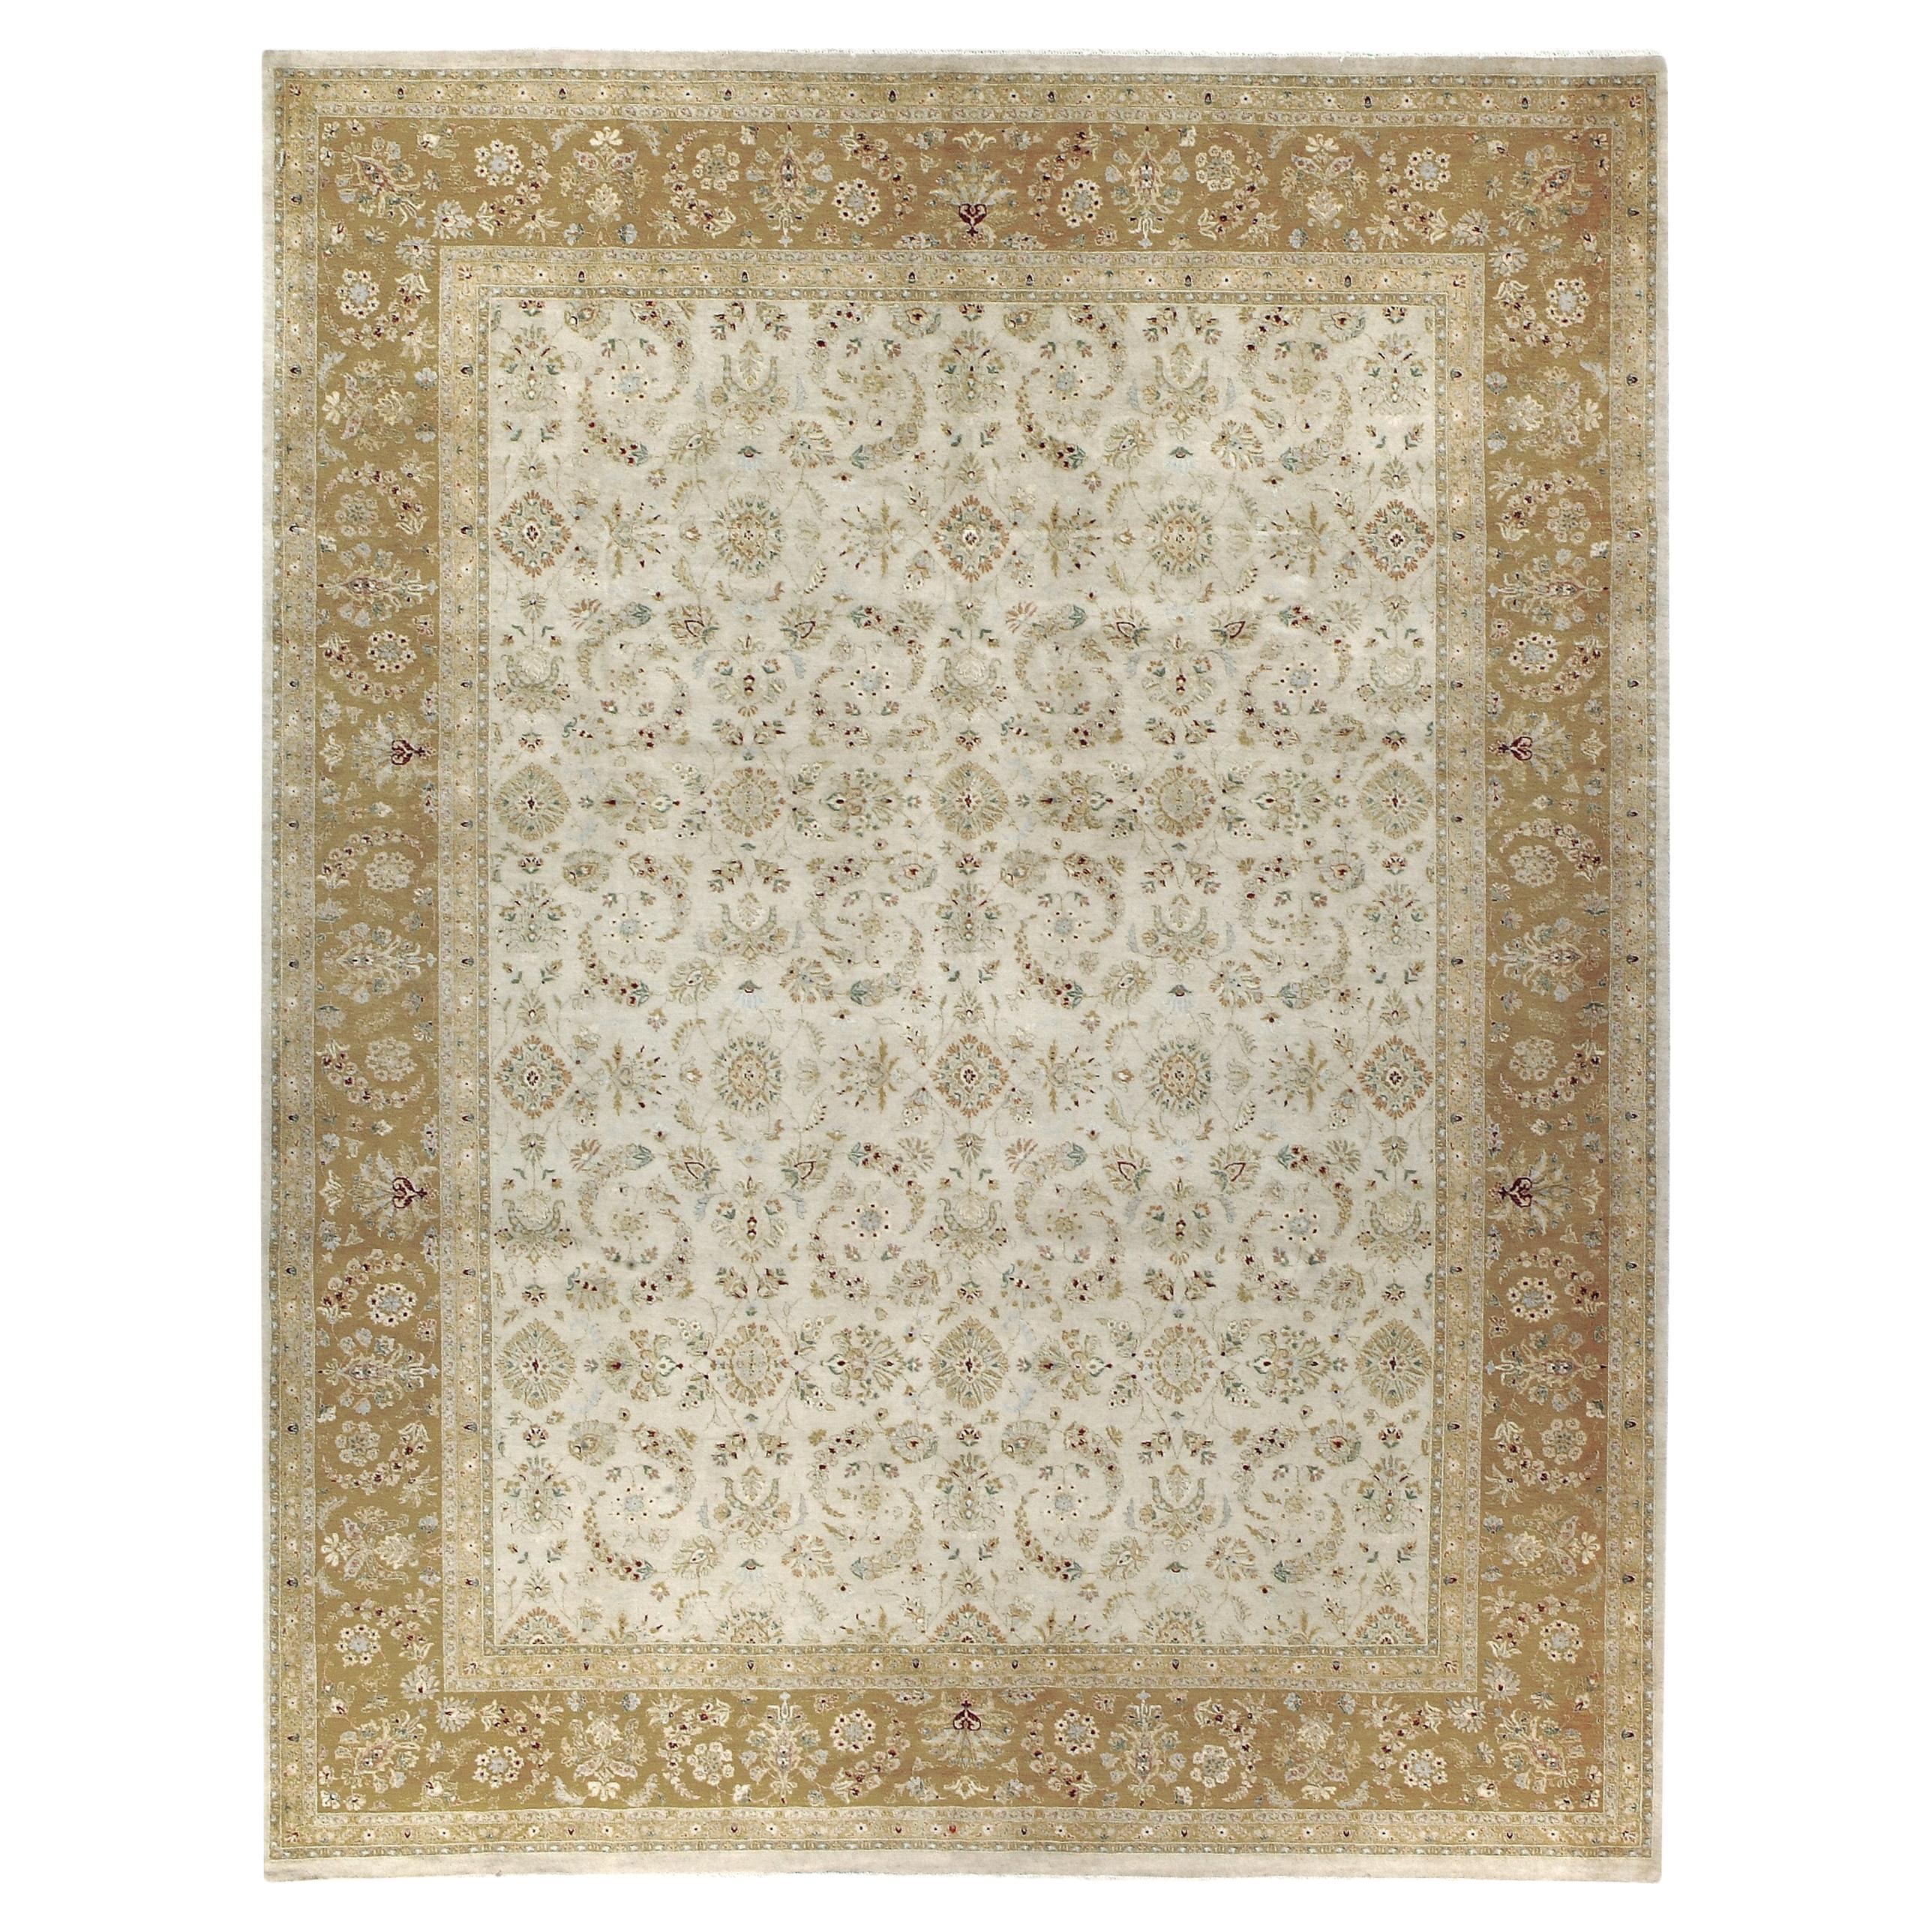 Luxury Traditional Hand-Knotted Yezd Cream and Gold 12x18 Rug